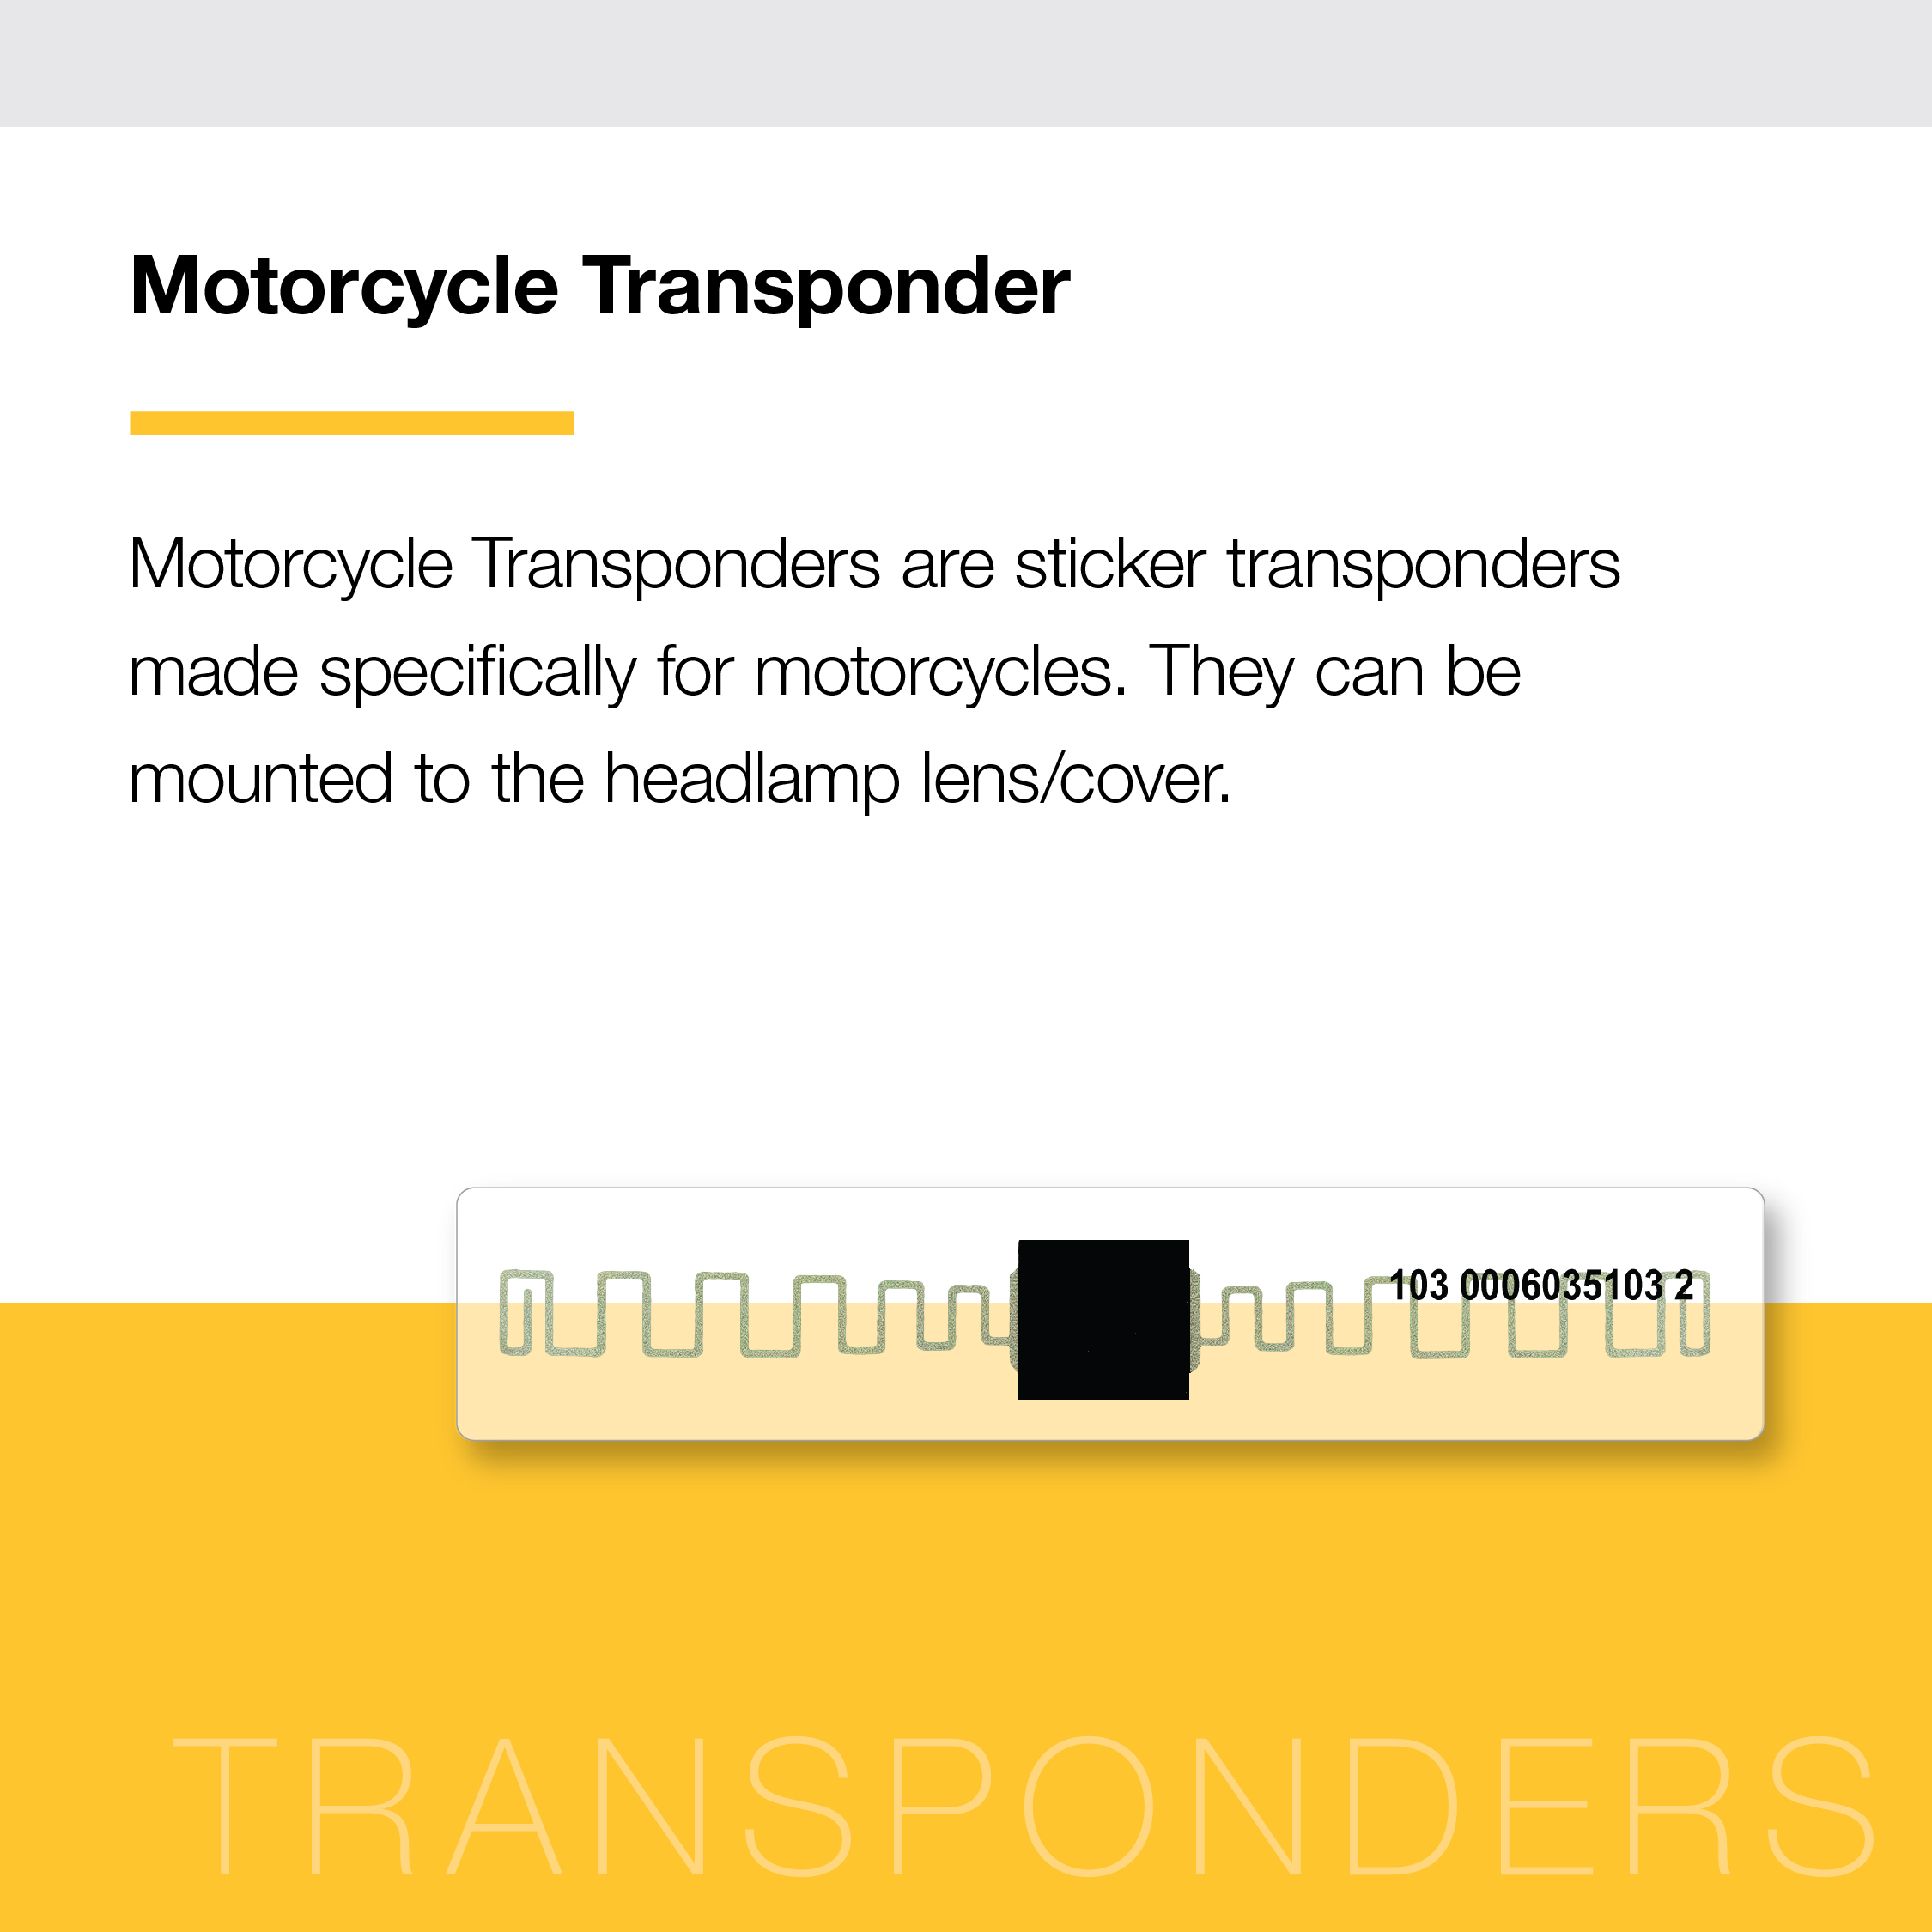 Graphic with text. Text reads "Motorcycle Transponder Motorcycle Transponders are sticker transponders made specifically for motorcycles. They can be mounted to the headlamp lens/cover." Image of a Motorcycle Sticker Transponder.